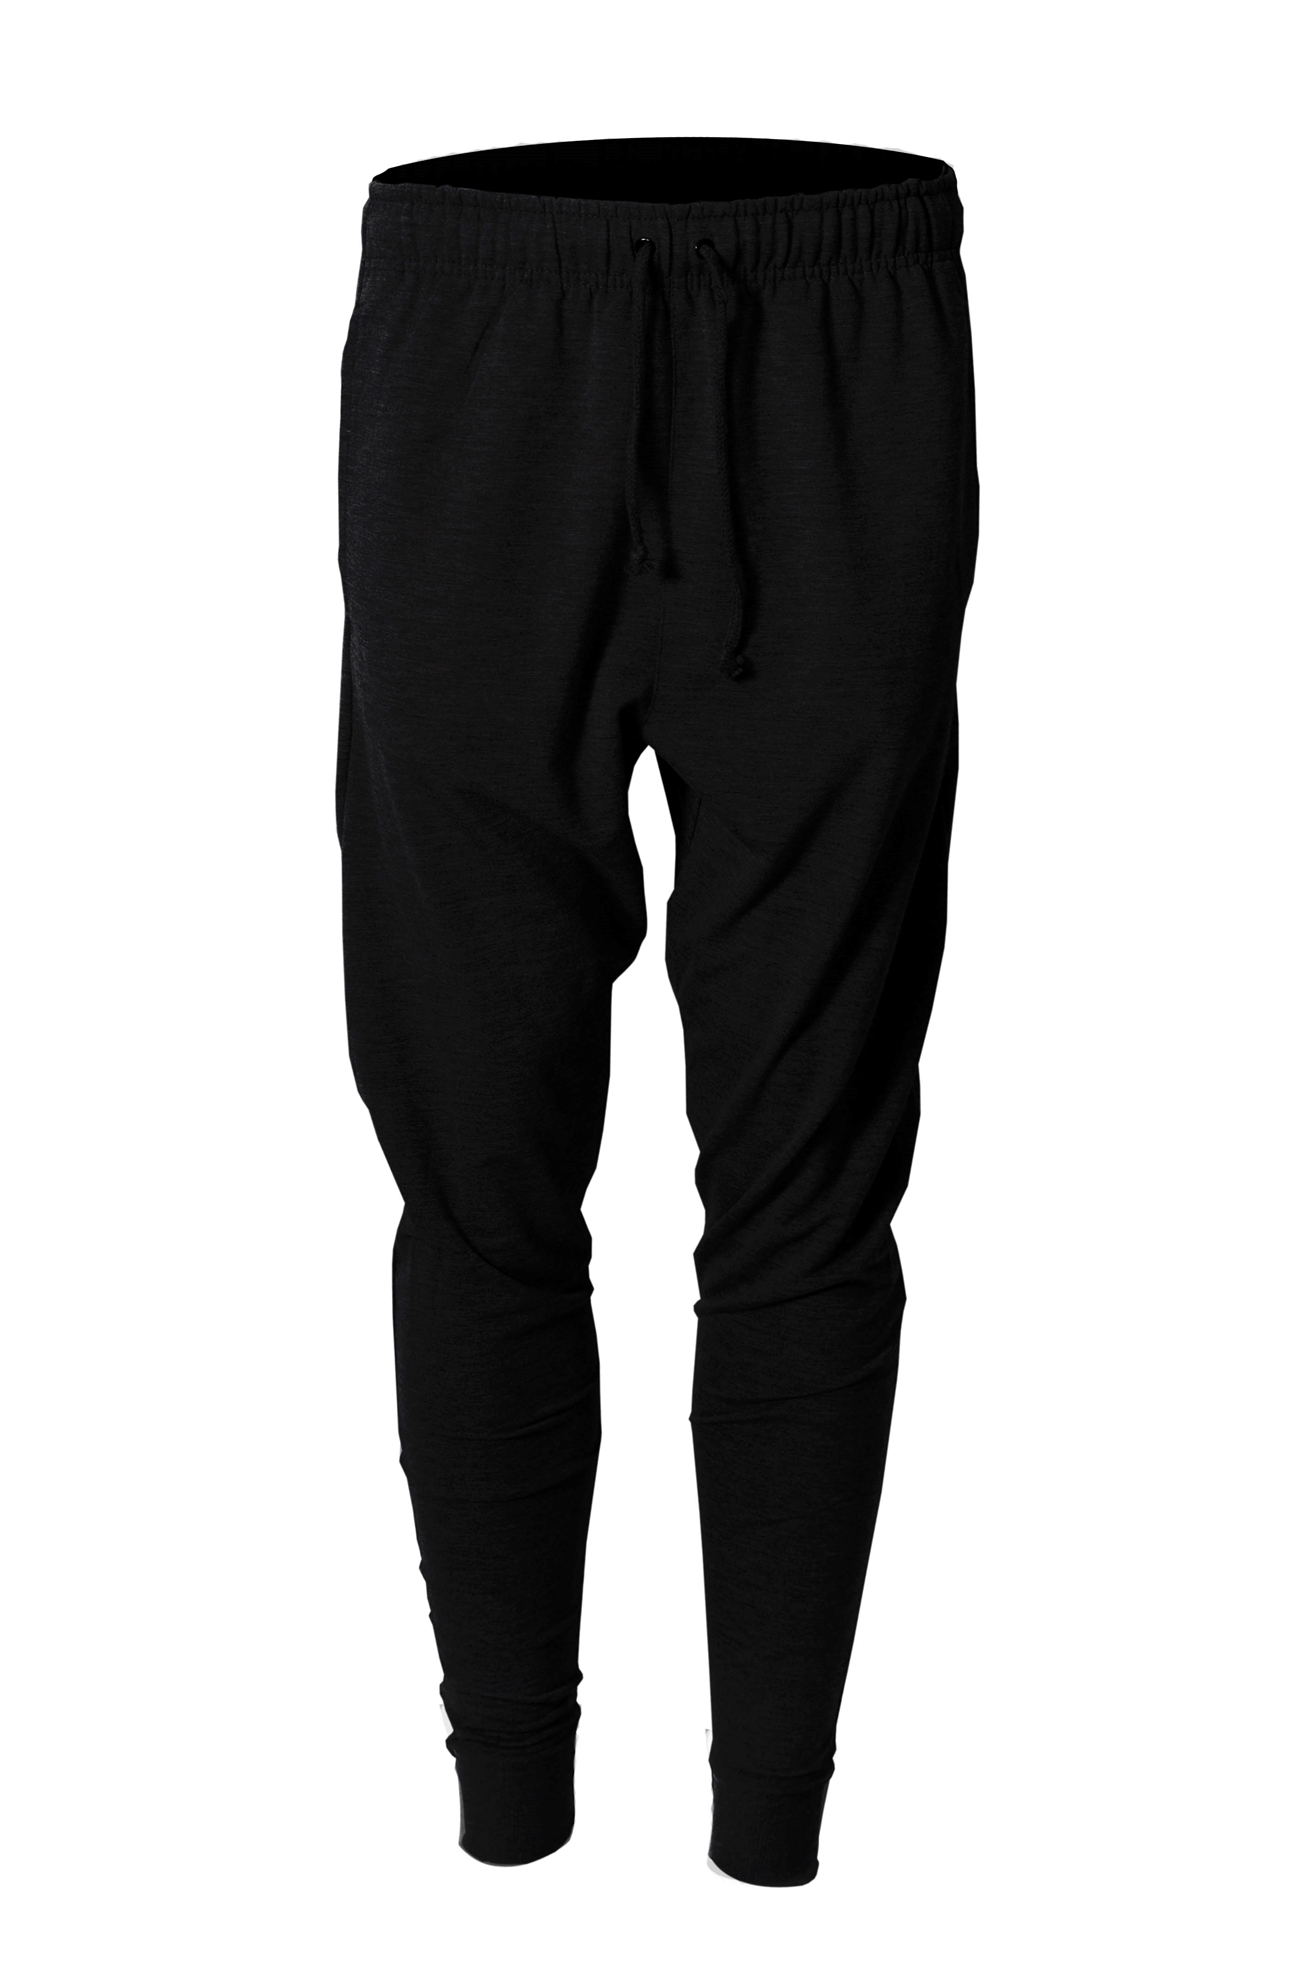 BAW Athletic Wear F64 - Adult Tri-Blend Jogger Pant